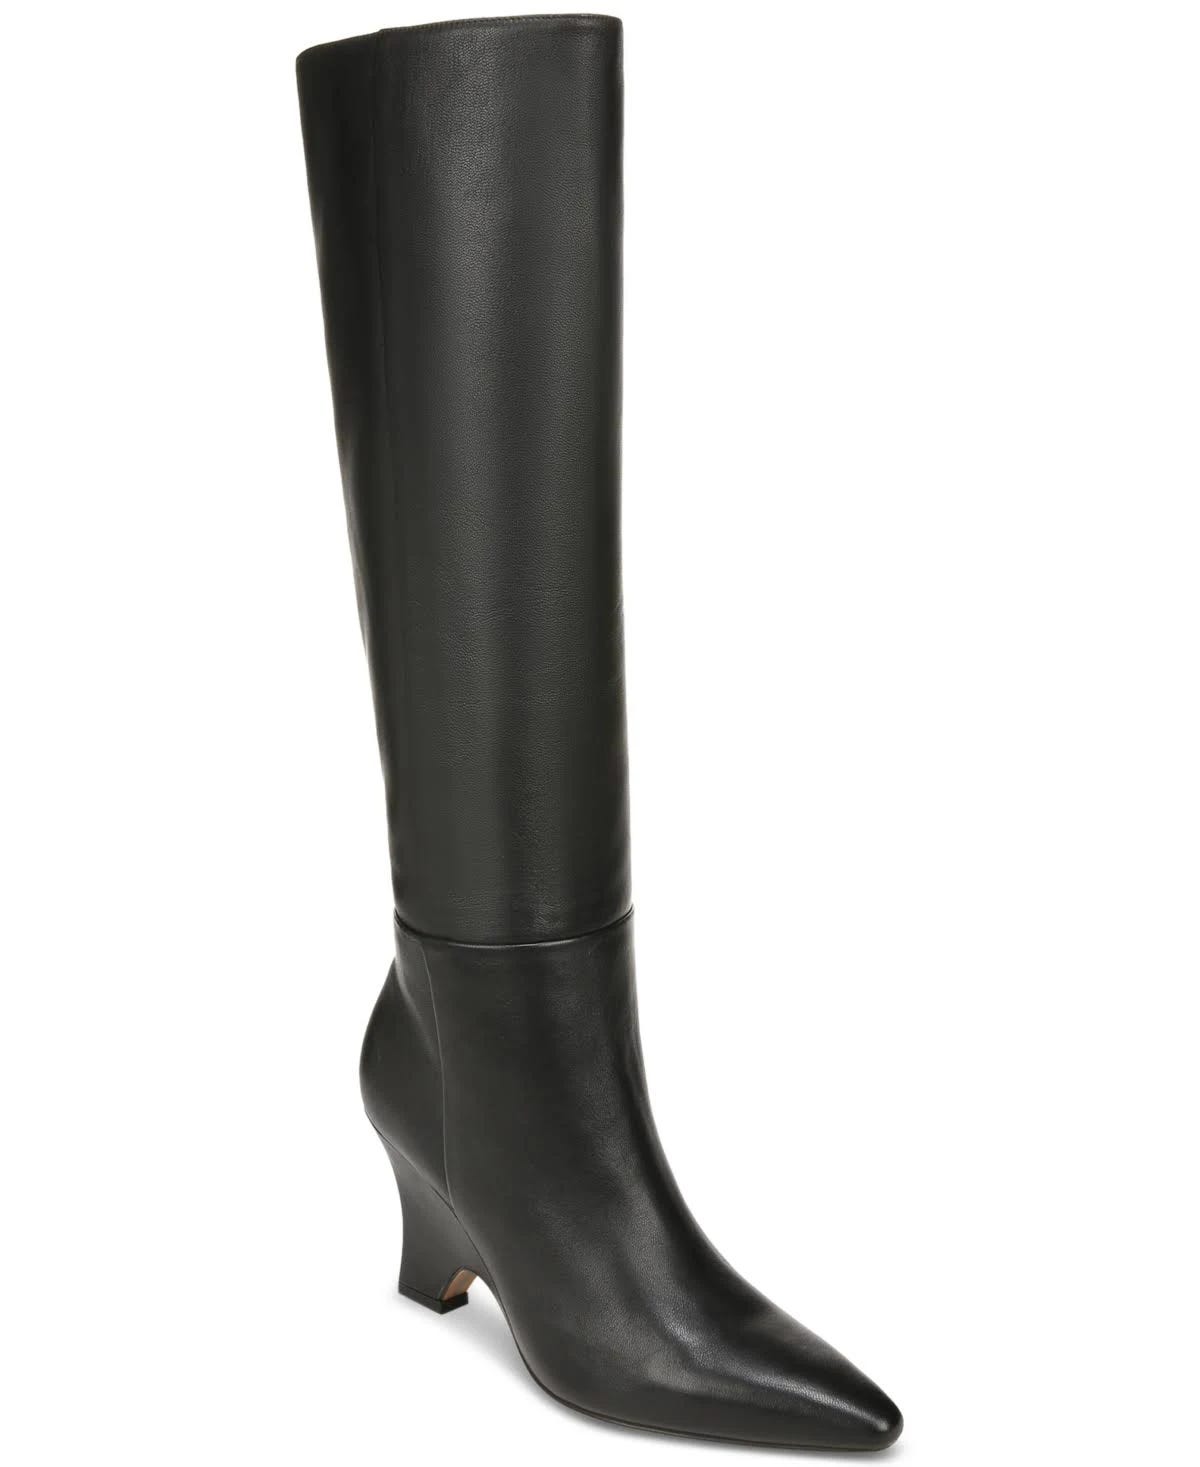 Stylish Black Leather Calf Boots with Pointed Toe | Image